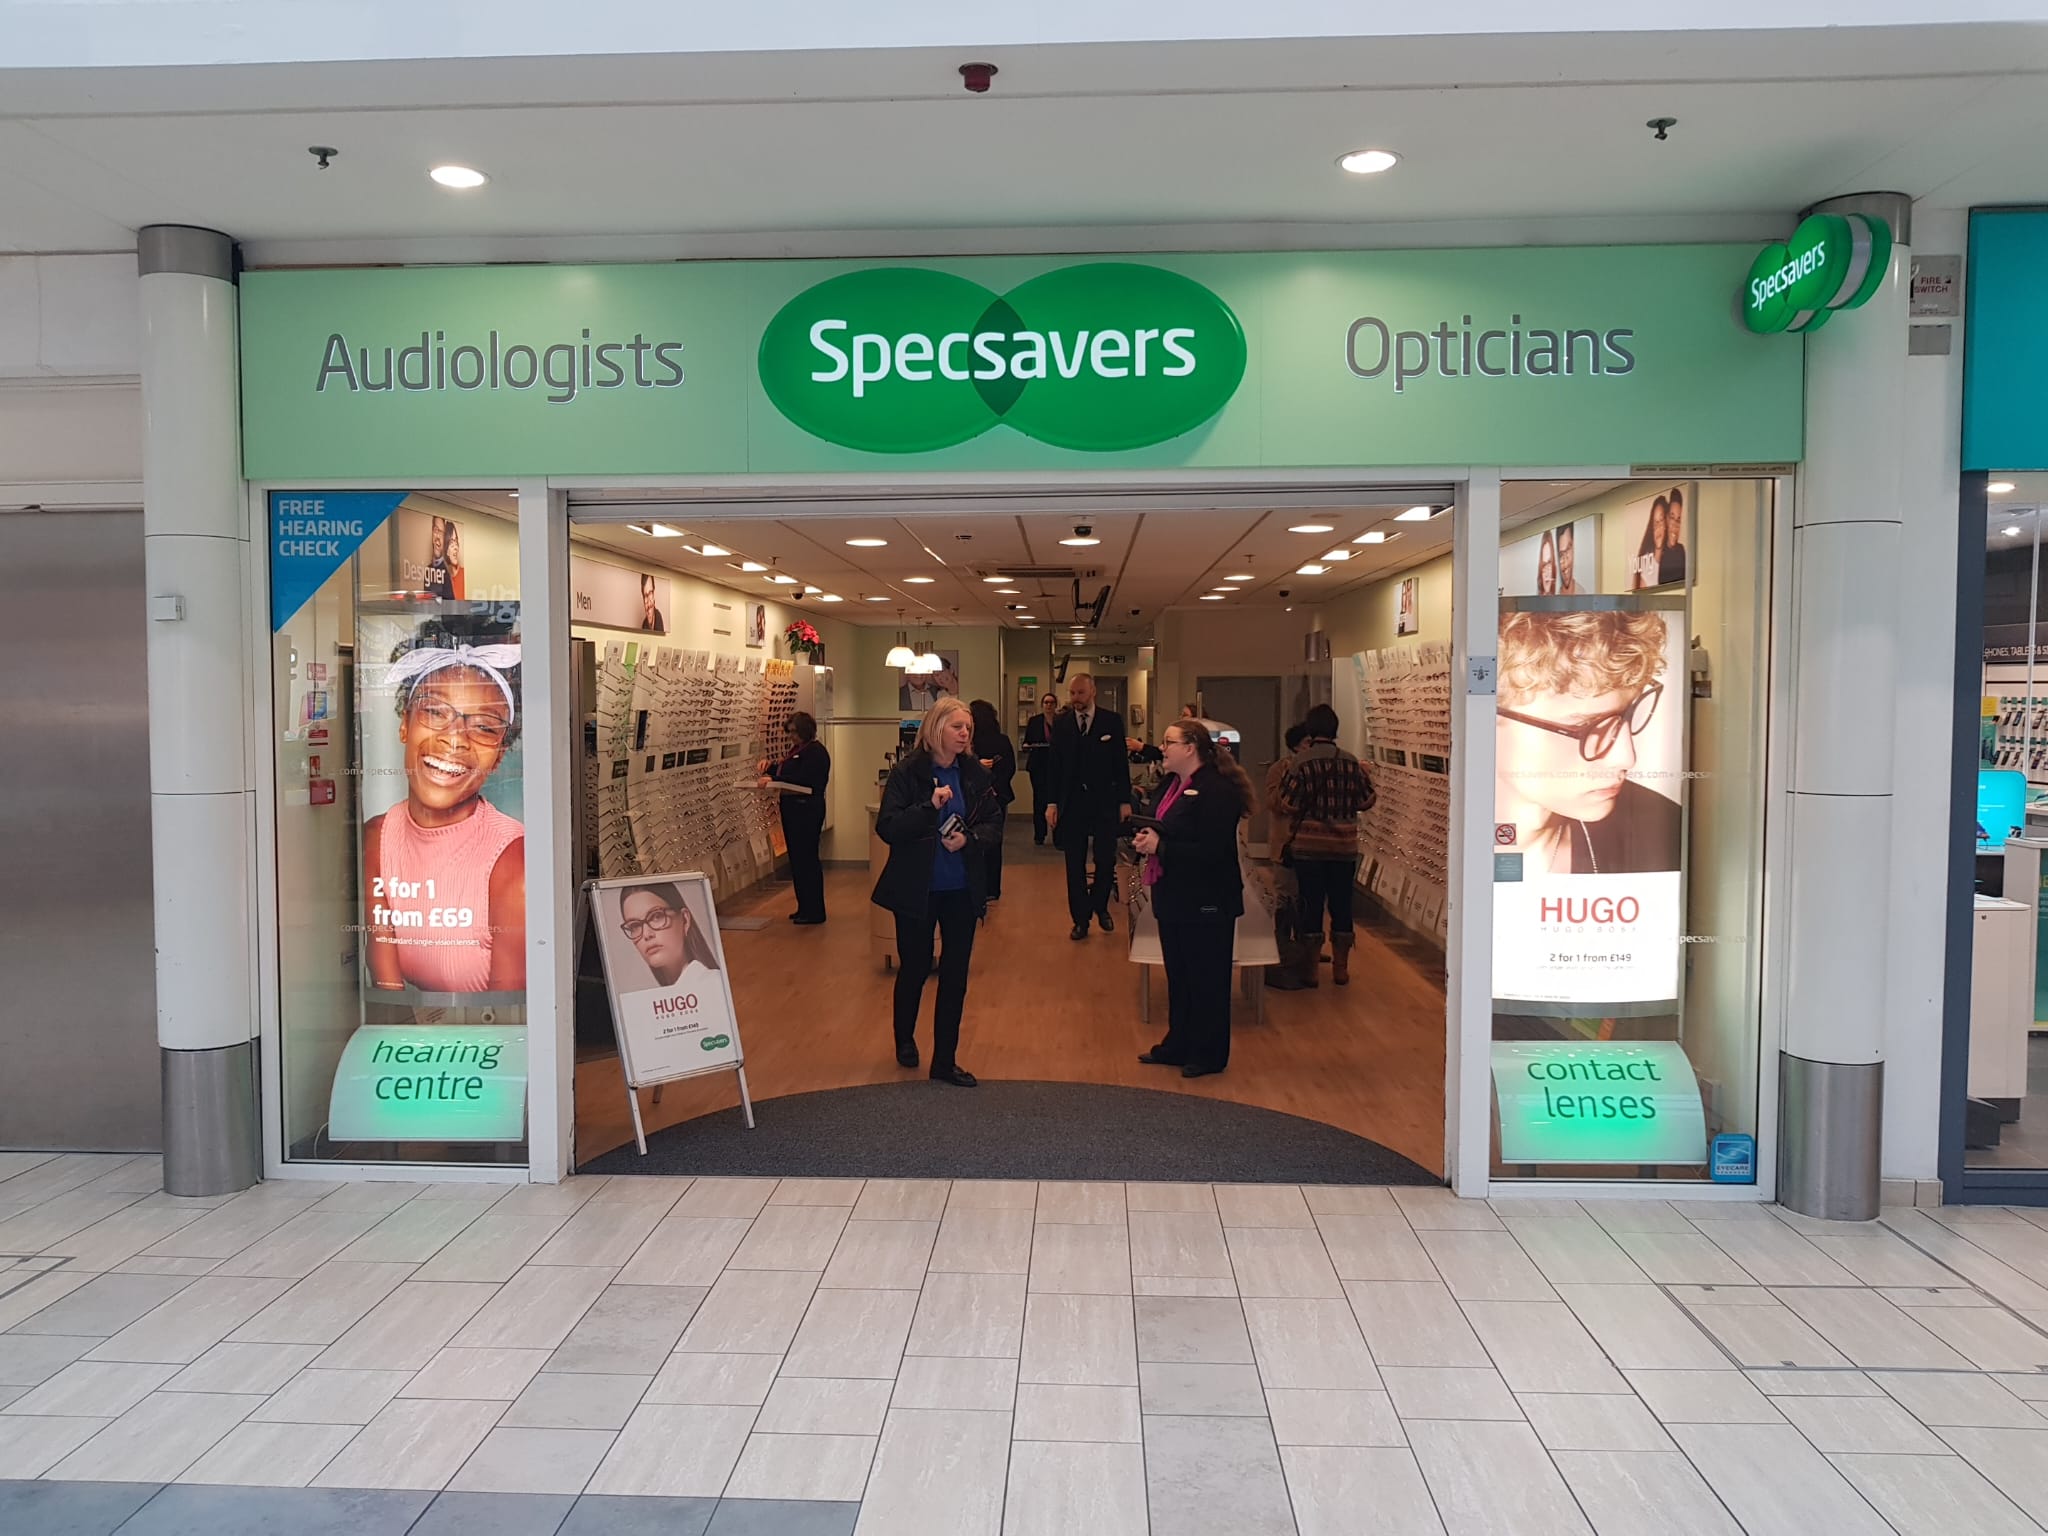 Images Specsavers Opticians and Audiologists - Ashford